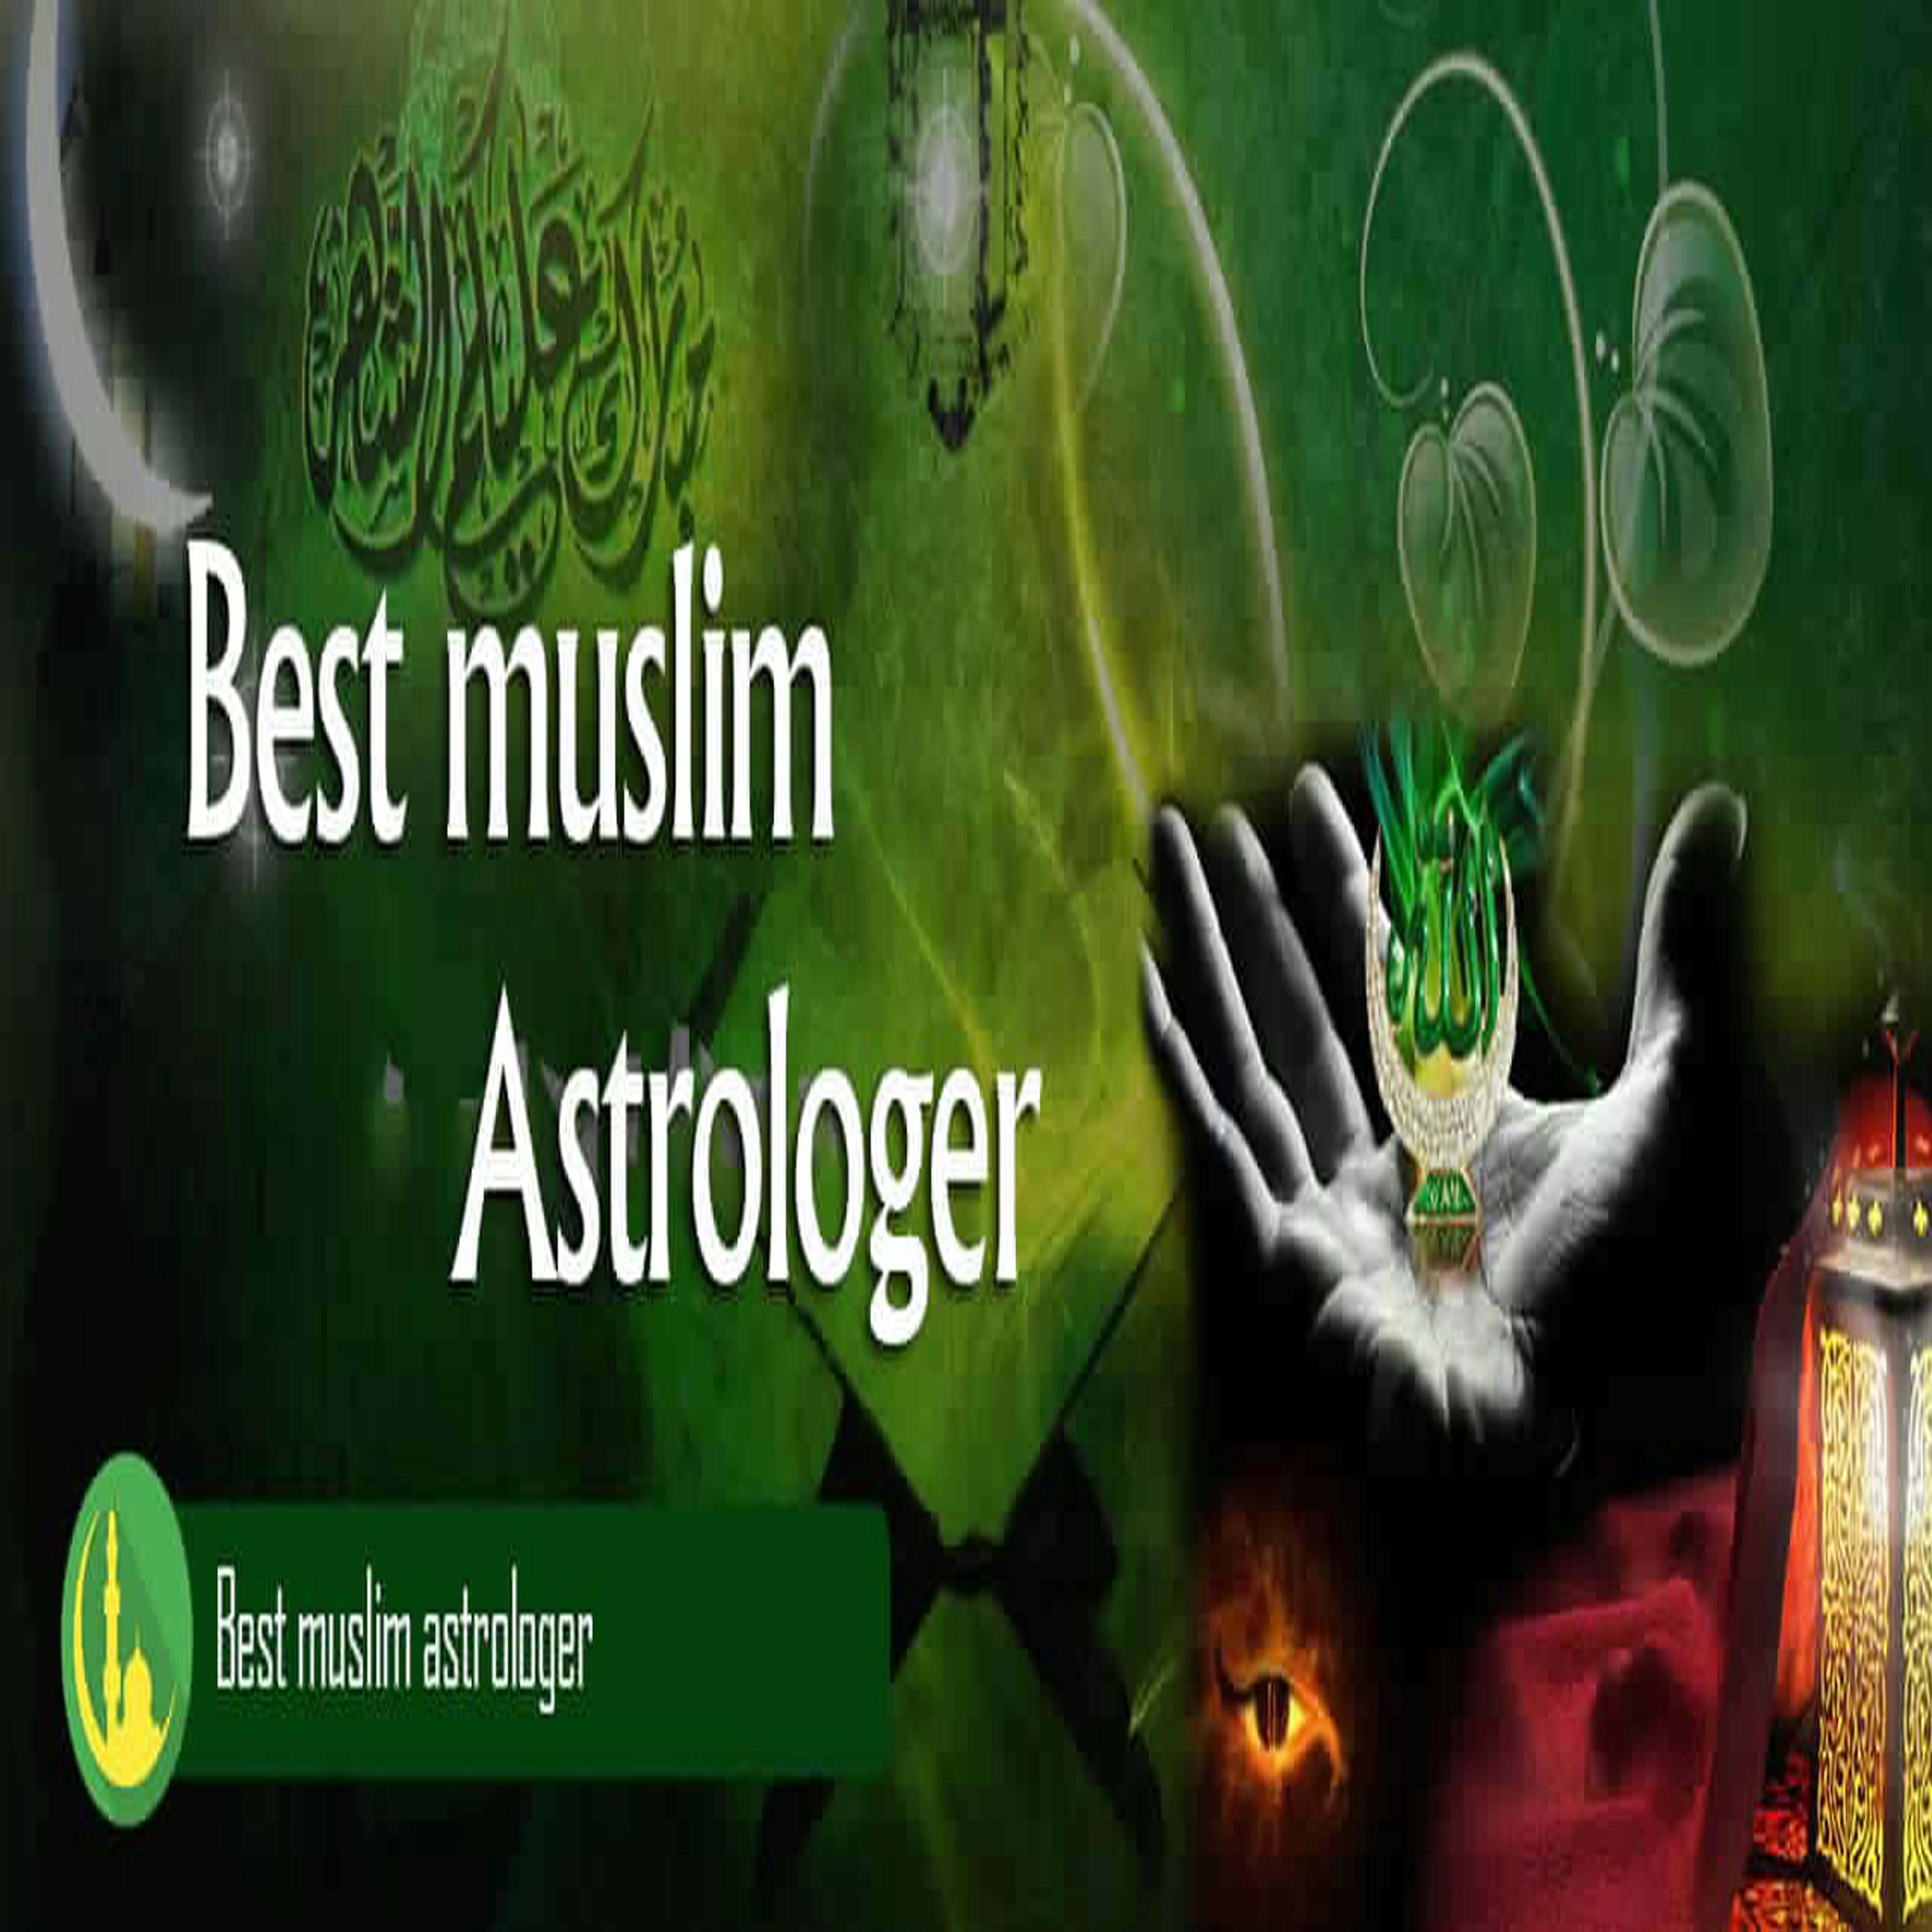 Free stock photo of famous Islamic astrologer, Muslim astrology expert services, Online famous Muslim astrology services